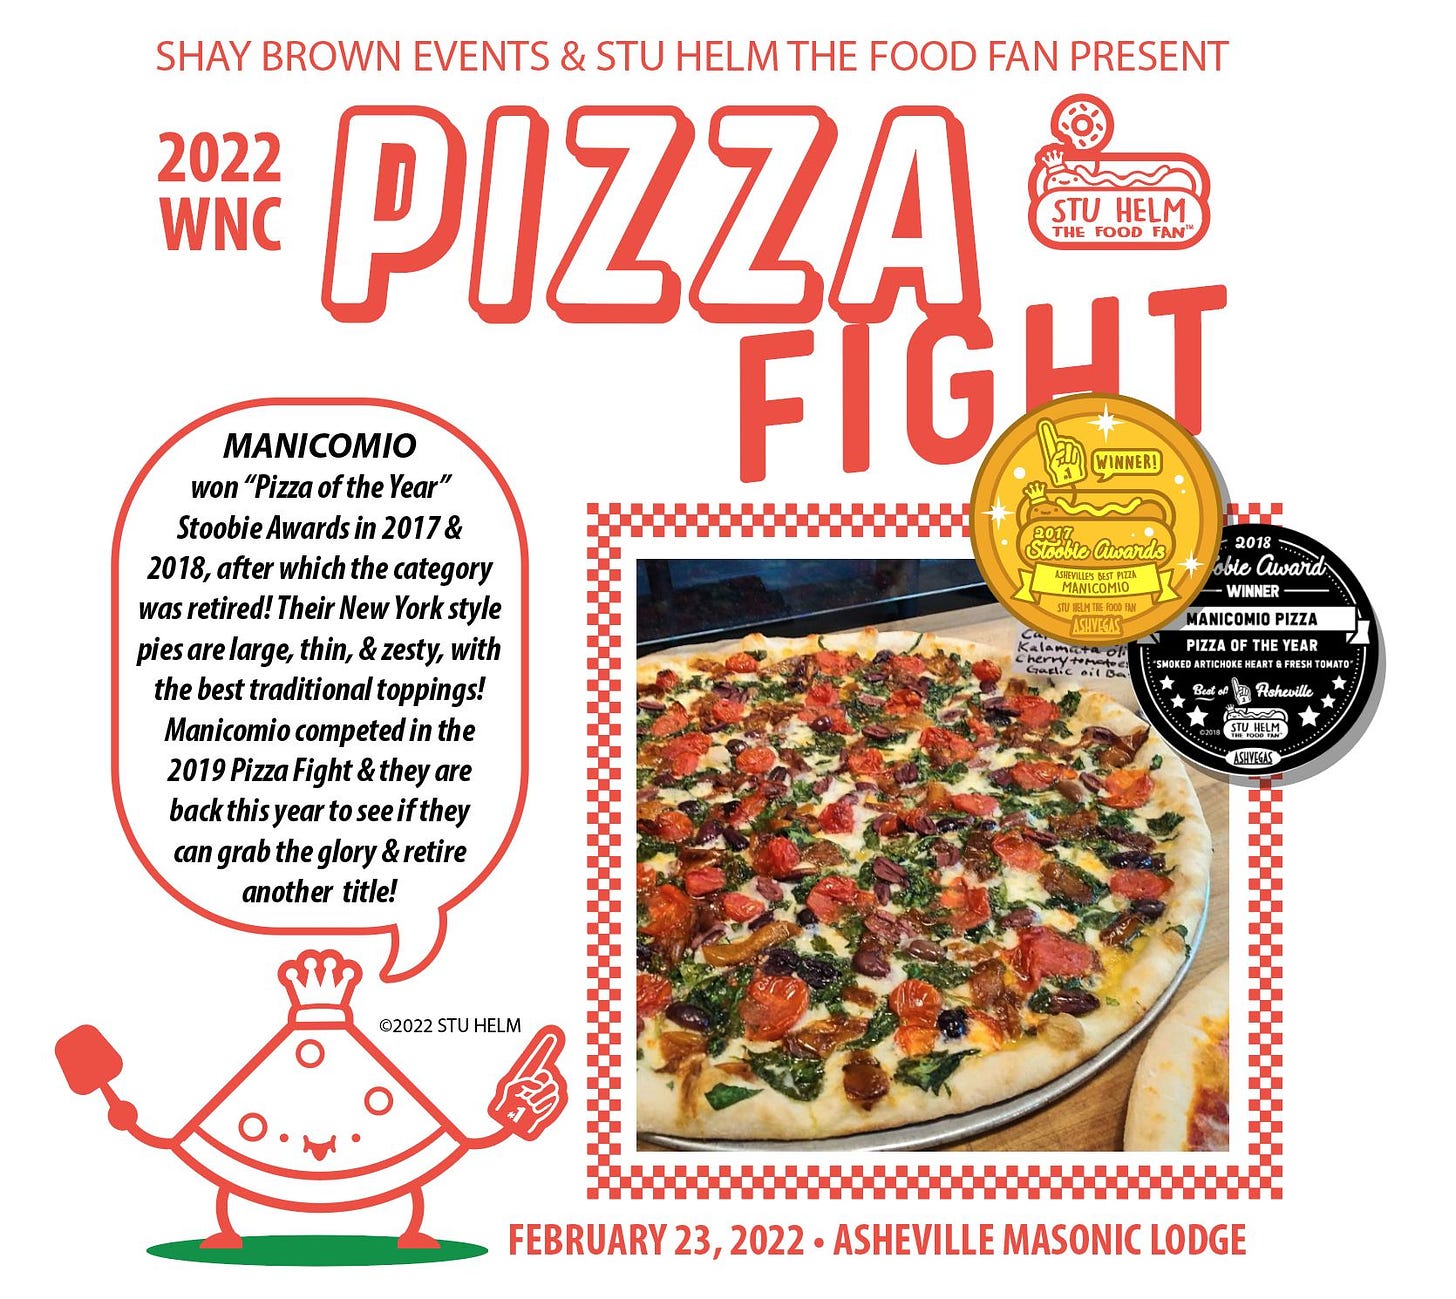 May be an image of pizza and text that says 'SHAY BROWN EVENTS & STU HELM THE FOOD FAN PRESENT 2022 WNC PIZZA STU HELM THE FOOD FAN FIGHT WINNER! H MANICOMIO won "Pizza the Year" Stoobie Awards 2017& 2018, after which the category etired! Their New style pies large, thin, zesty, with the best traditional toppings! Manicomio competed the 2019 Pizza Fight they are back this tos see they can grab glory &retire another title! awards obie award WINNER ANICOMIO PIZZA Asheville ASHVEGAS ©2022STUHELM STUHELM FEBRUARY 23,2022 ASHEVILLE MASONIC LODGE'